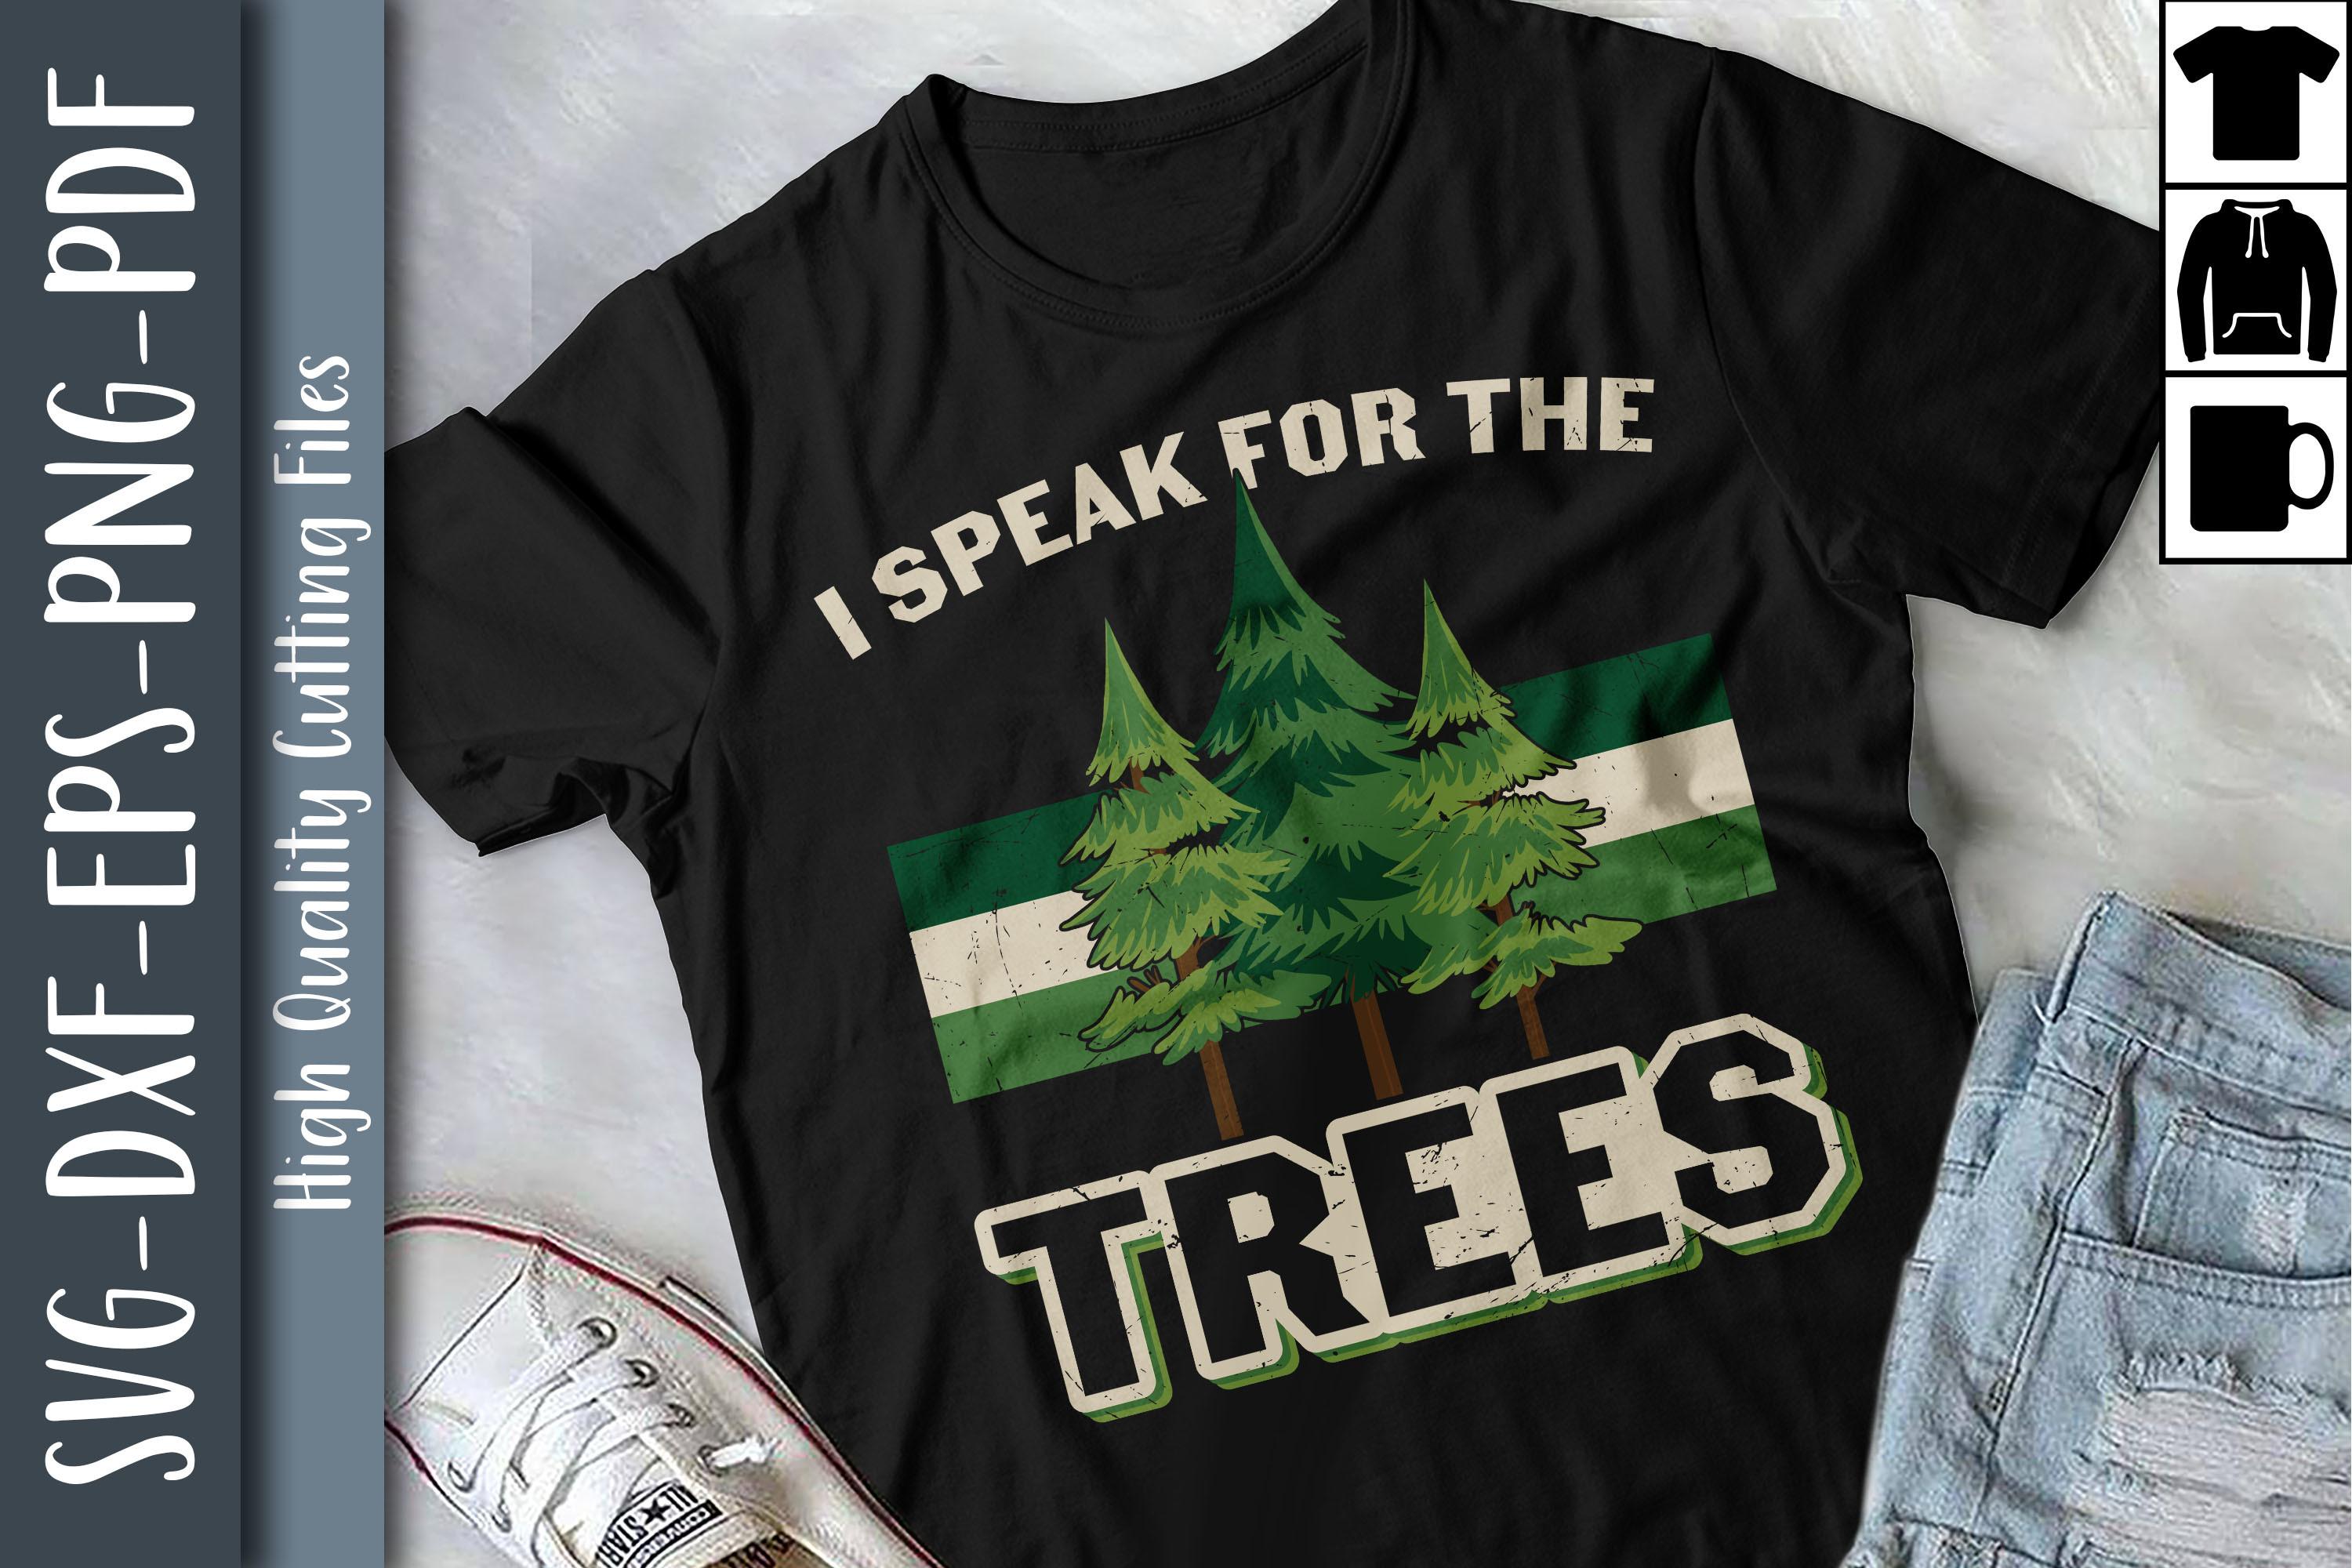 I Speak for the Trees Save the Planet